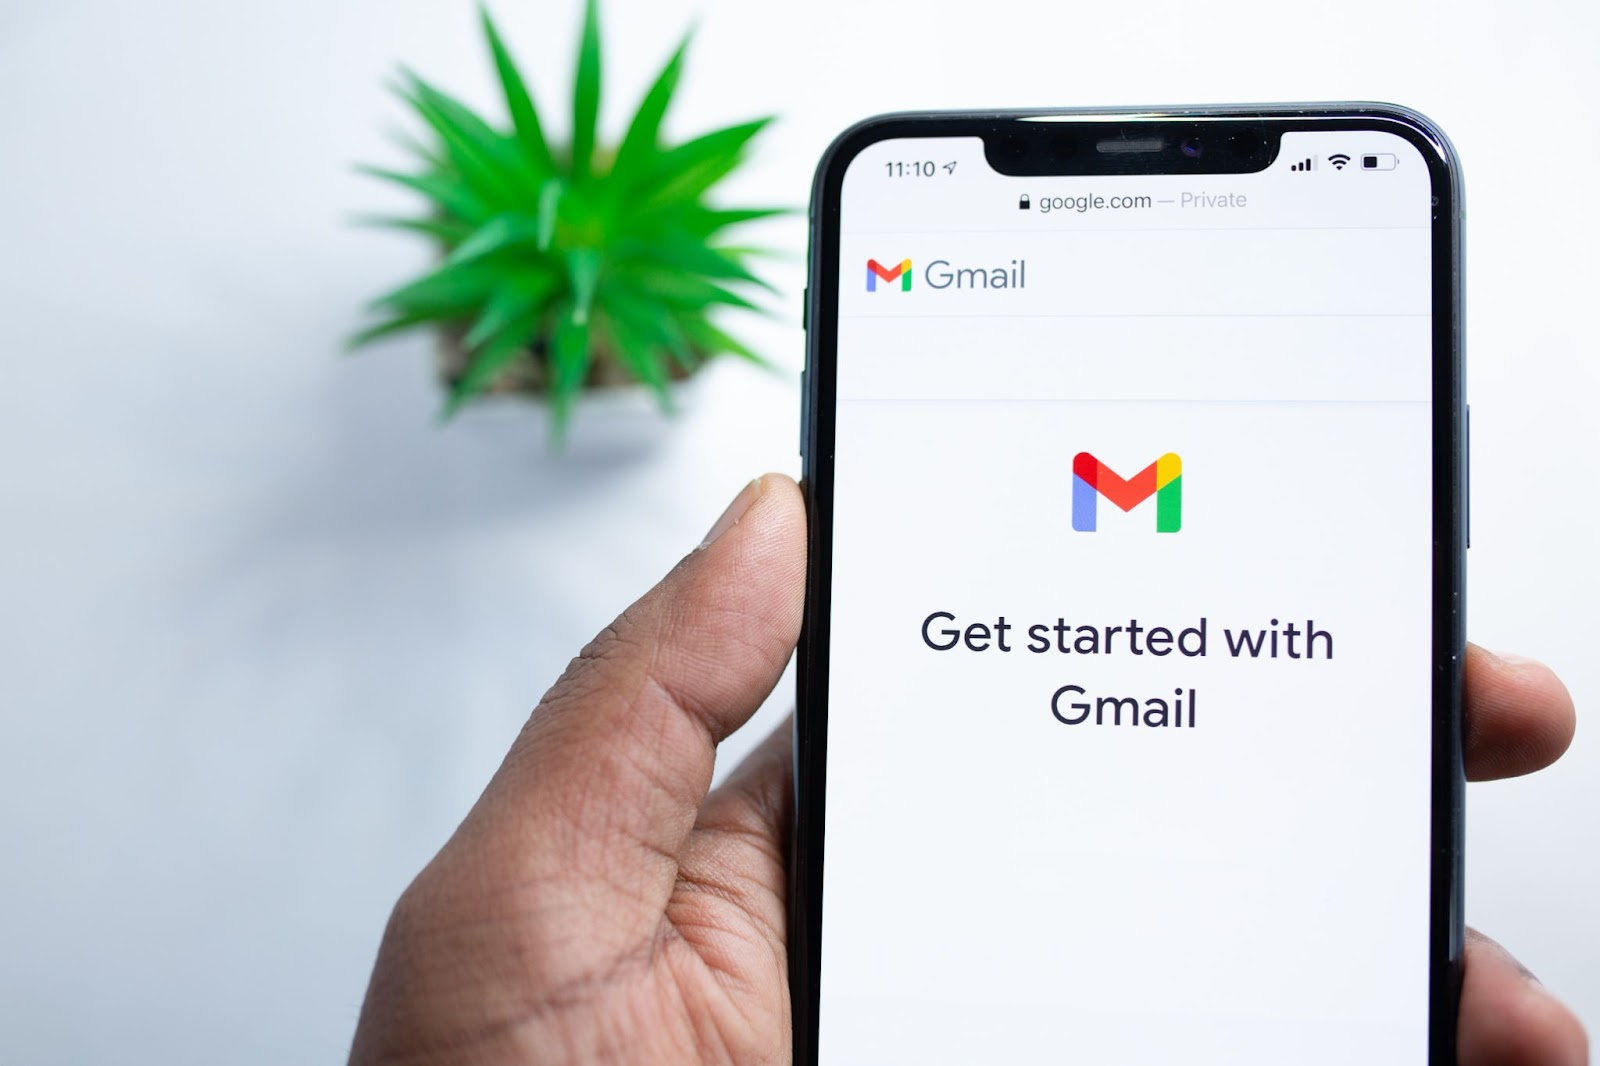 Get started with Gmail